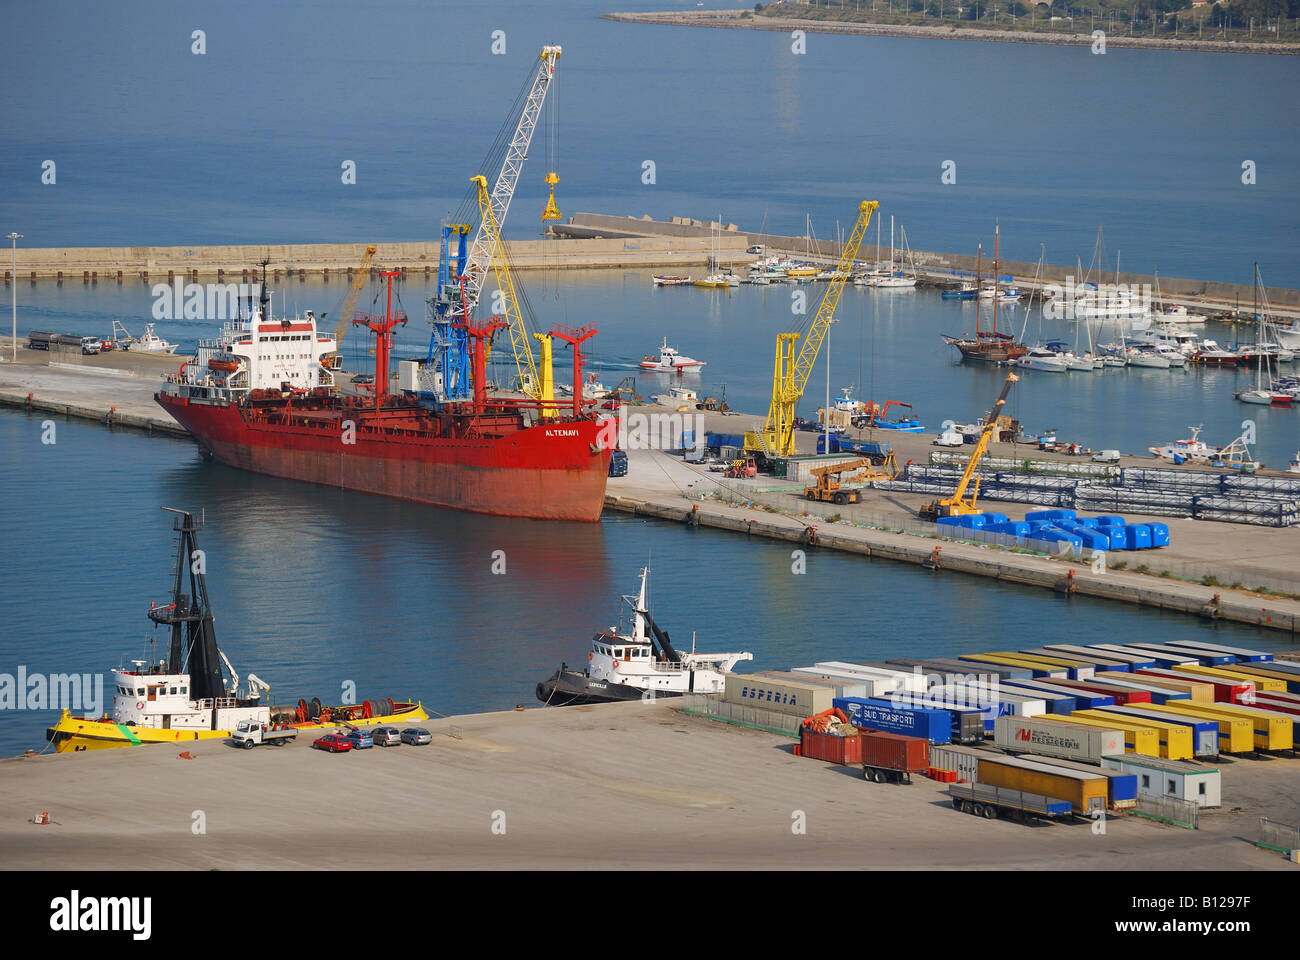 Ship unloading in port, Termini Imerese, Palermo Province, Sicily, Italy Stock Photo